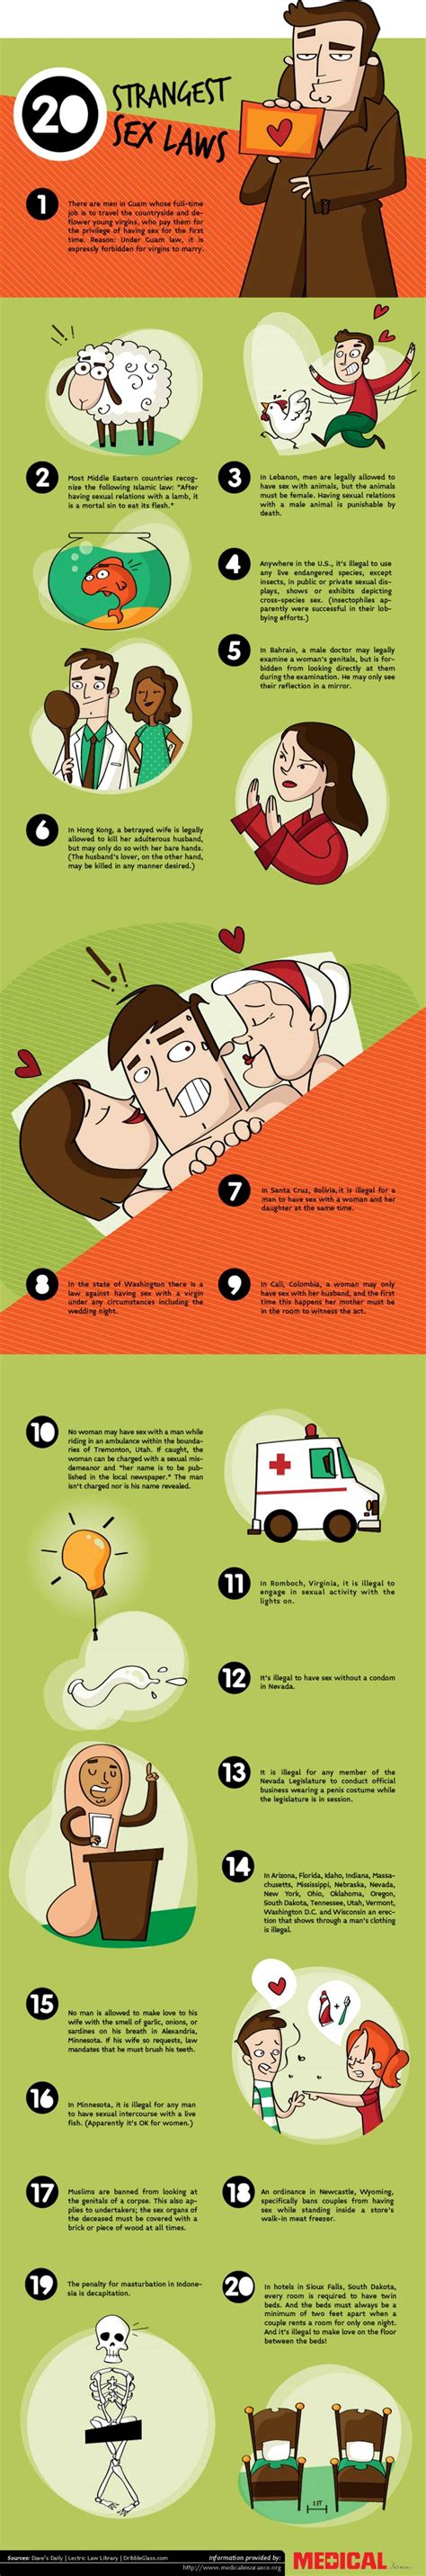 14 strangest sex laws 20 sex infographics that can help you create